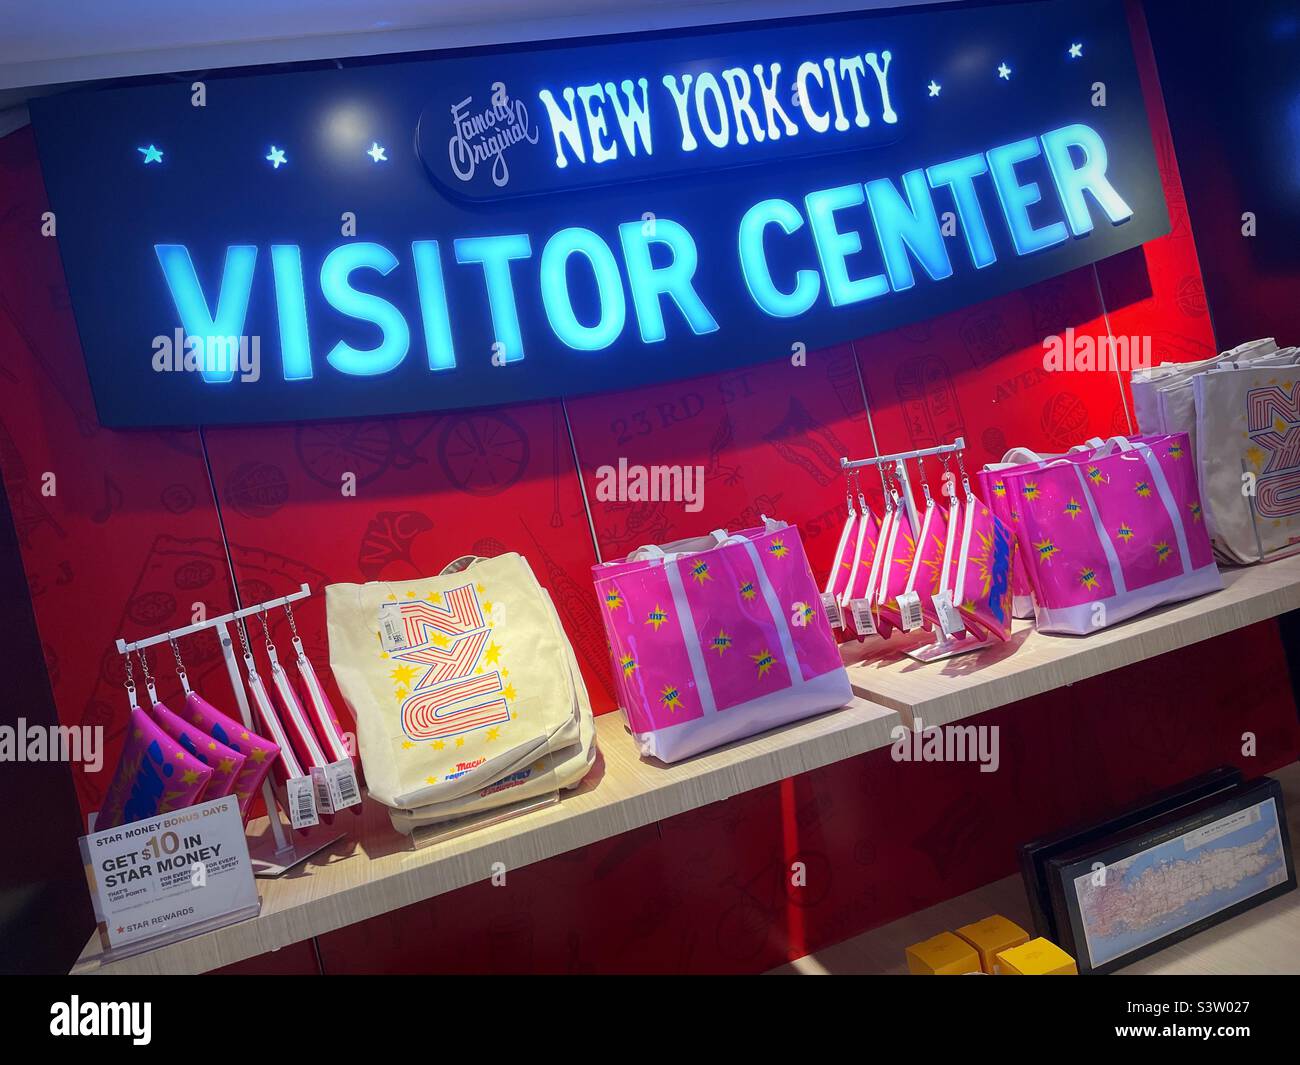 Macy’s new York city visitor center in its flag ship store in Herald Square, 2022, NYC, USA Stock Photo